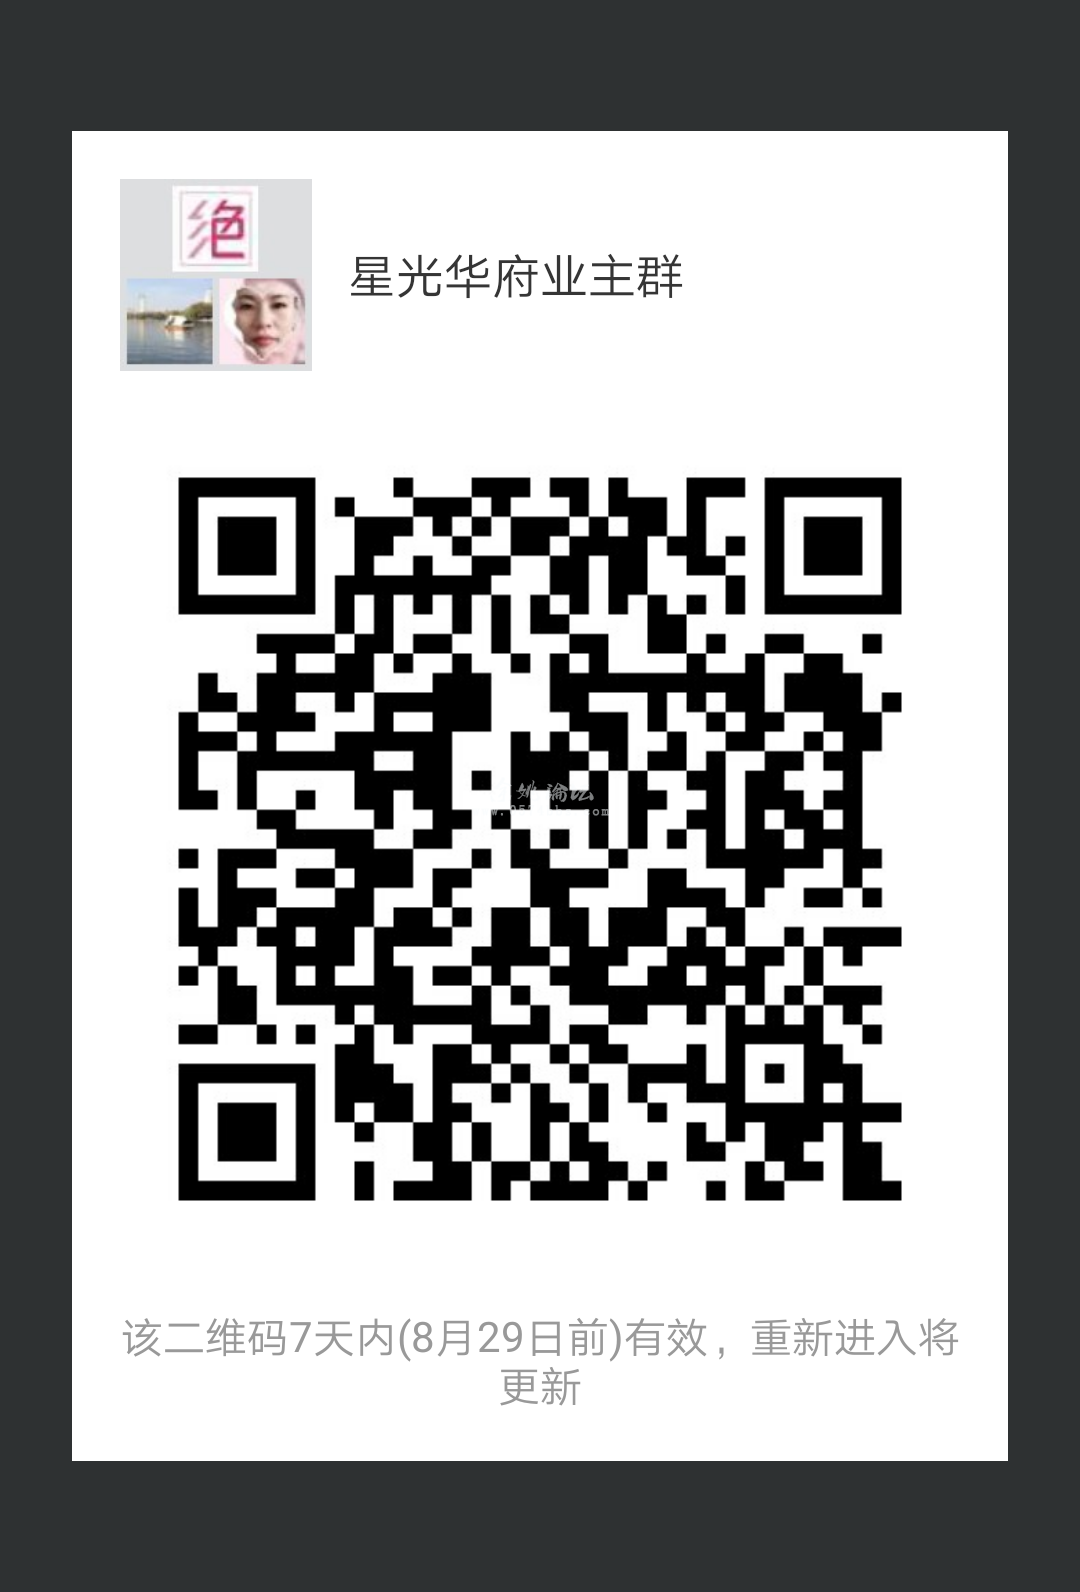 mmqrcode1534911116183 (1).png